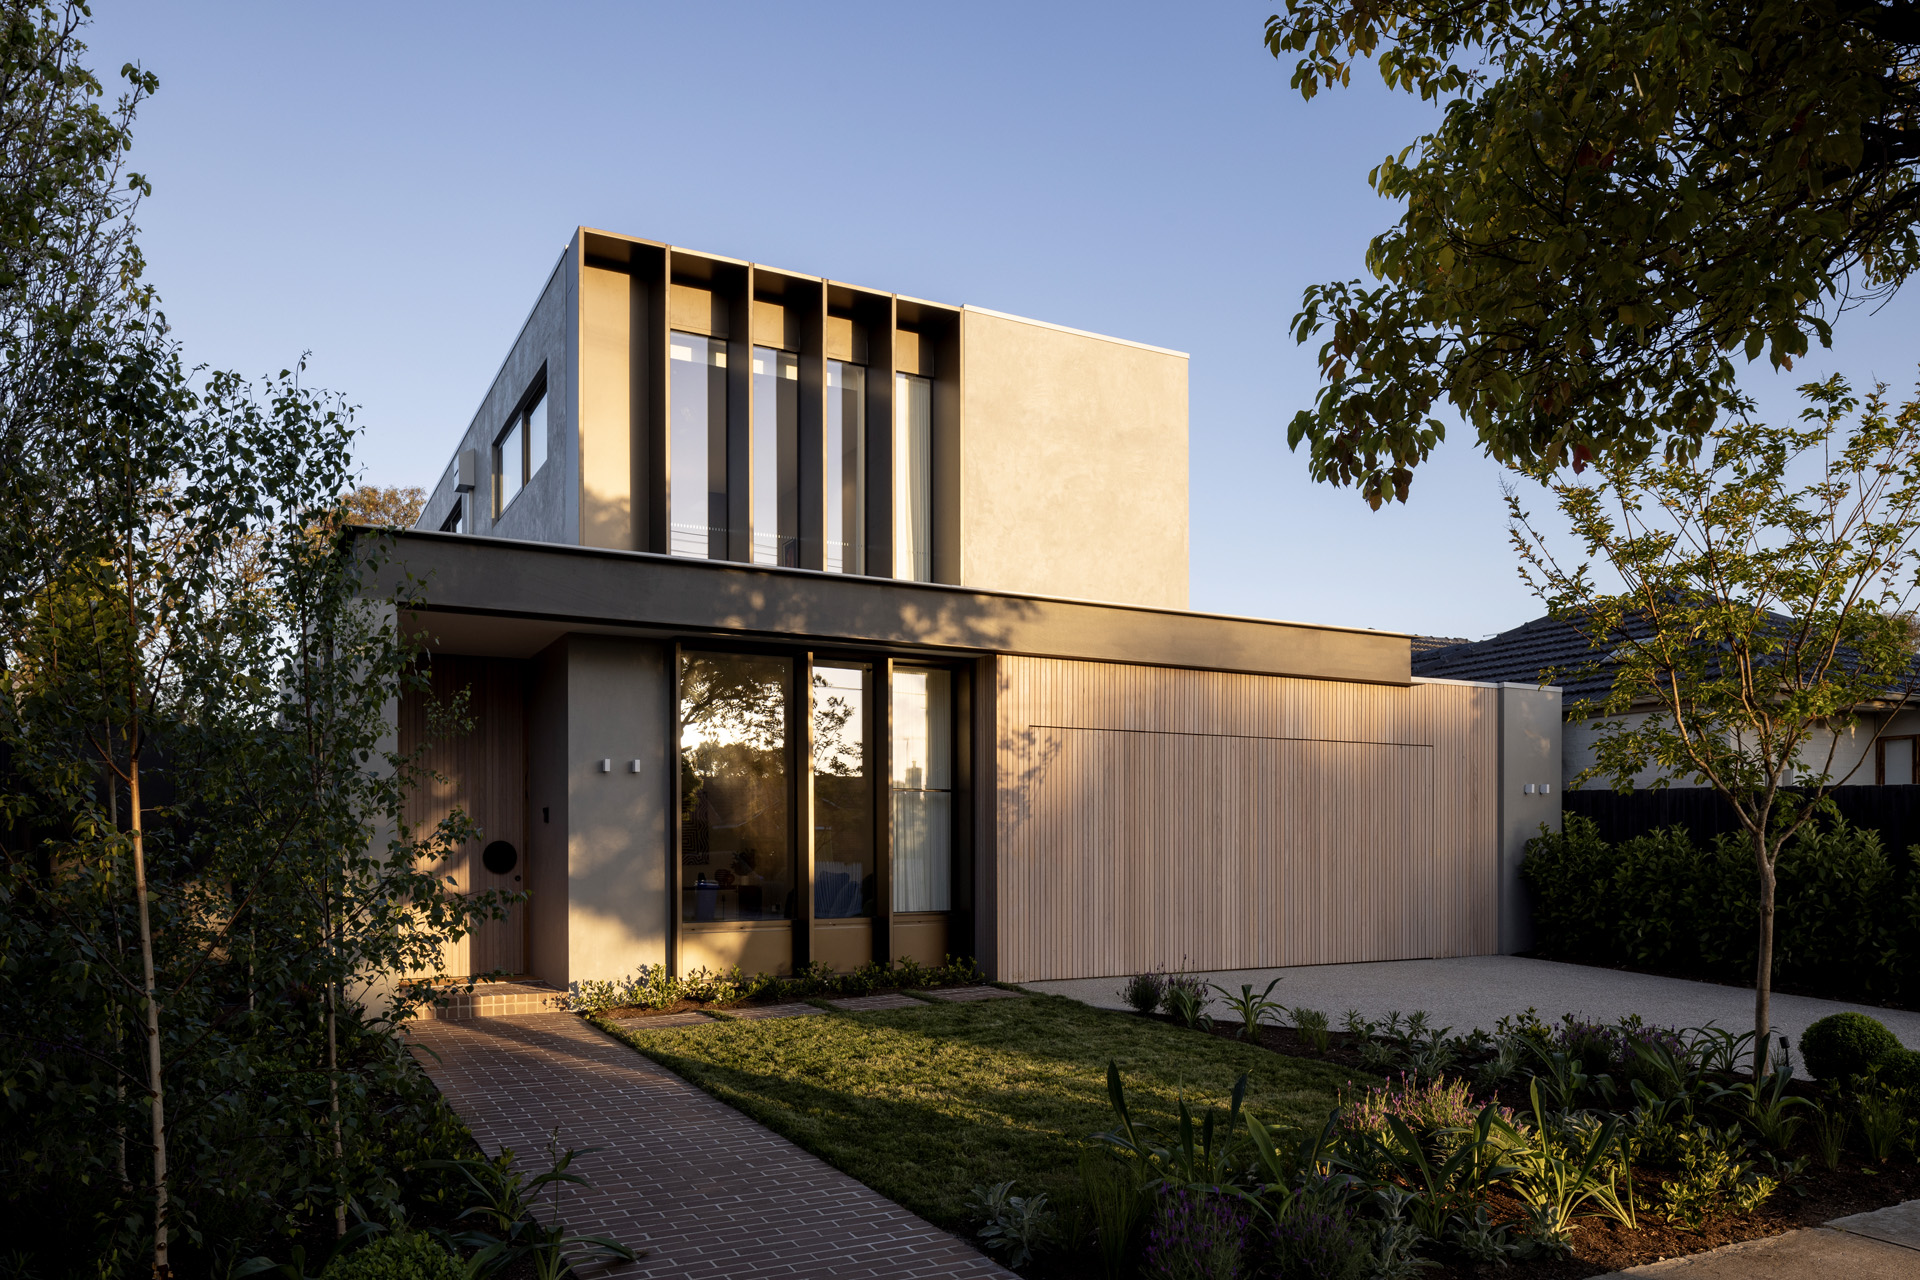 Exterior house Facade, featuring timber slat garage and two storey house